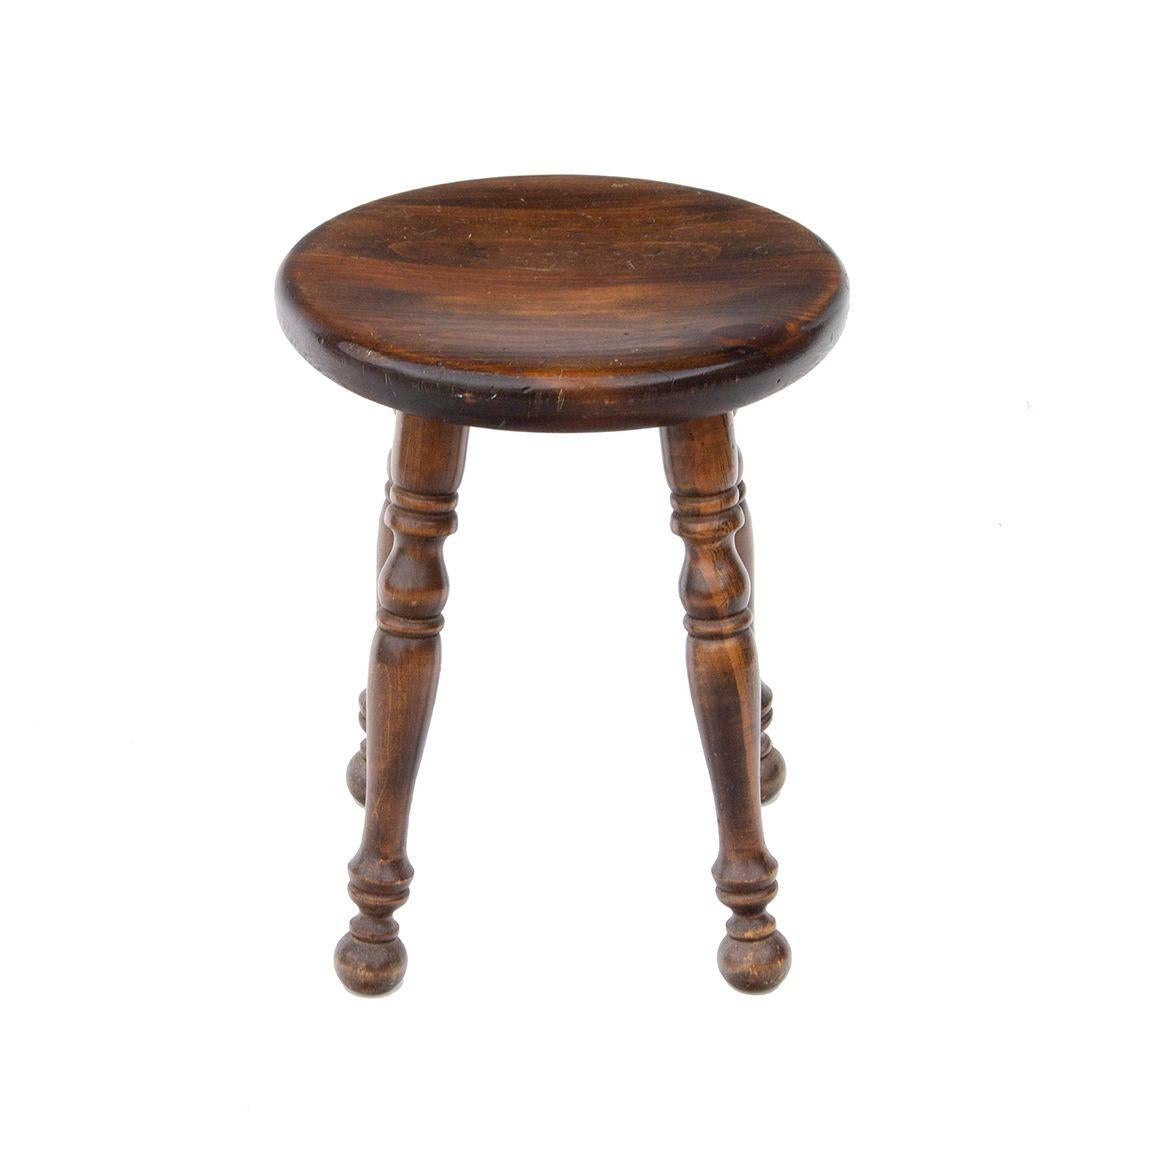 USA, 1960s
Solid dark wooden stool with turned legs. Nice detail to this accent piece. Use as additional seating, accent, or as a step. Pictured with chair to show scale. Stamped Ethan Allen.
CONDITION NOTES: In good condition with light age